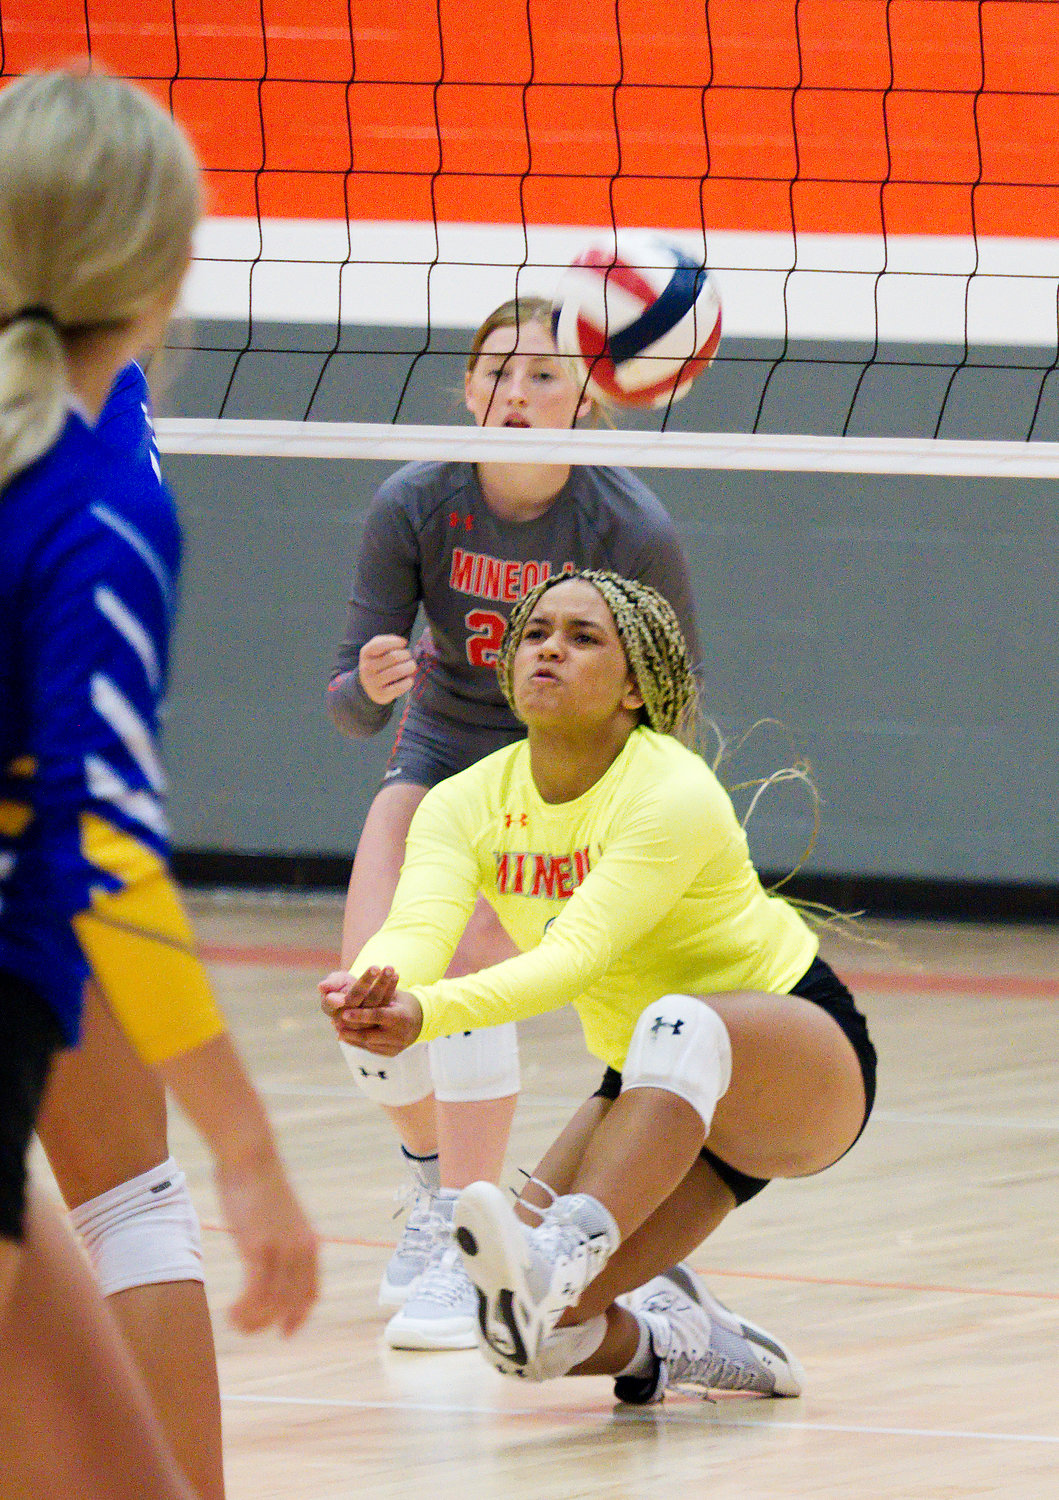 Paris Spigner digs out a shot from Brownsboro in the season-opening game for the Mineola Lady Jacket volleyball team last Tuesday. Mineola lost 17-25, 25-22, 17-25, 21-25.